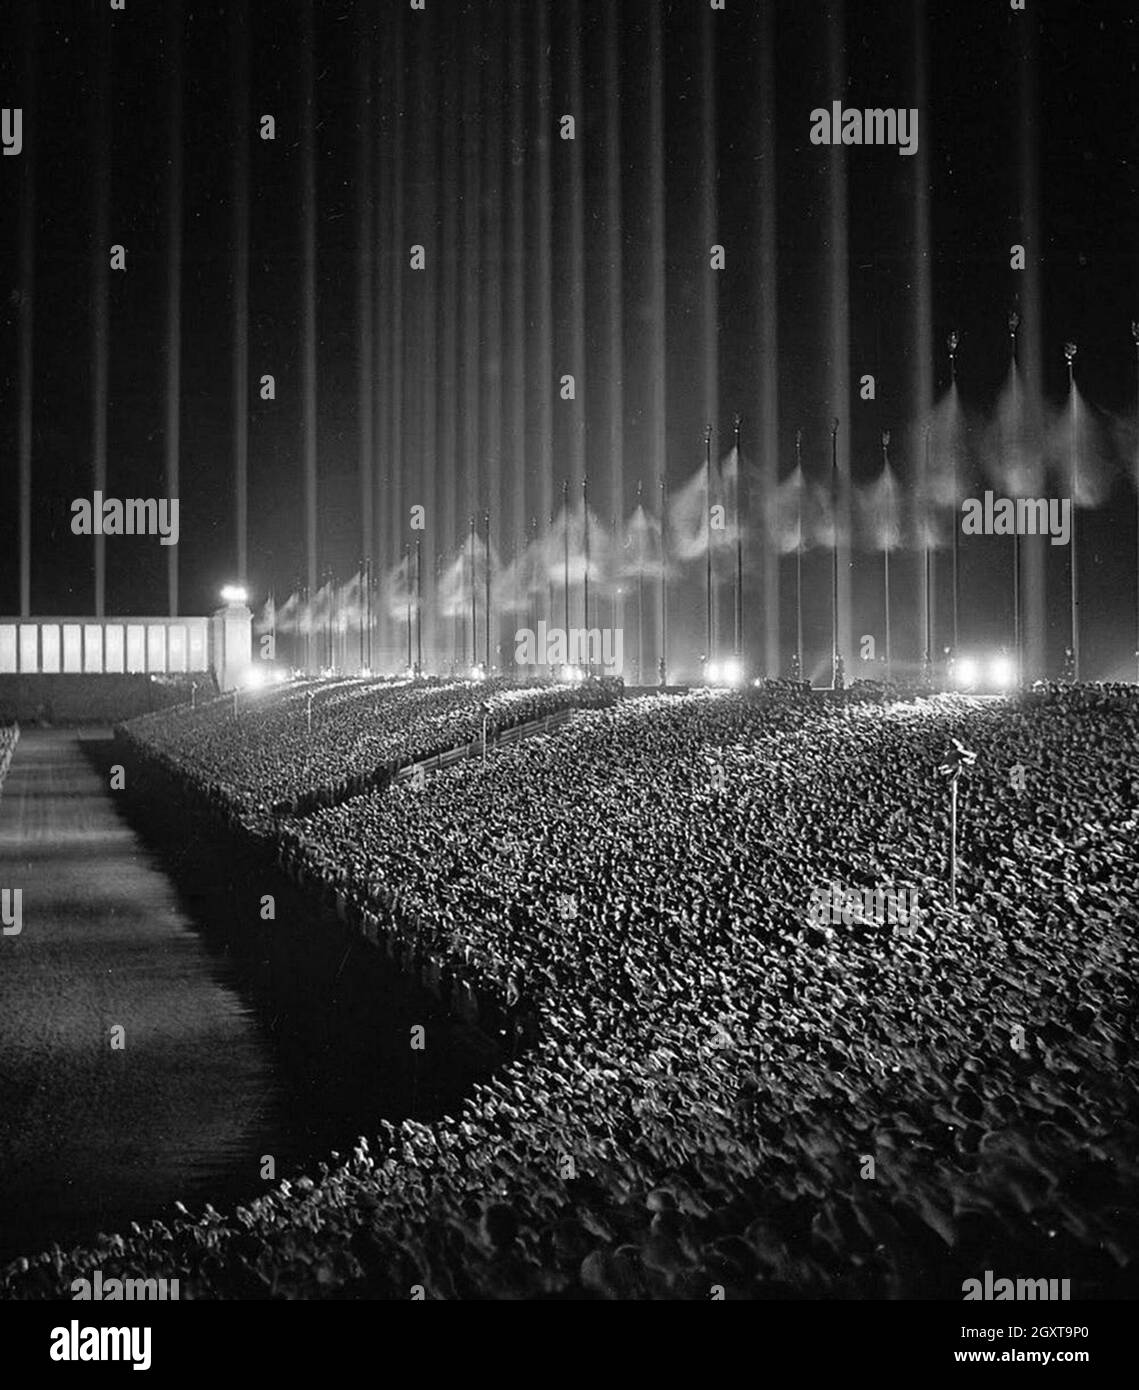 The impressive Cathedral of Light, designed by Albert Speer, at the Nazi Party Nuremburg Rally Stock Photo